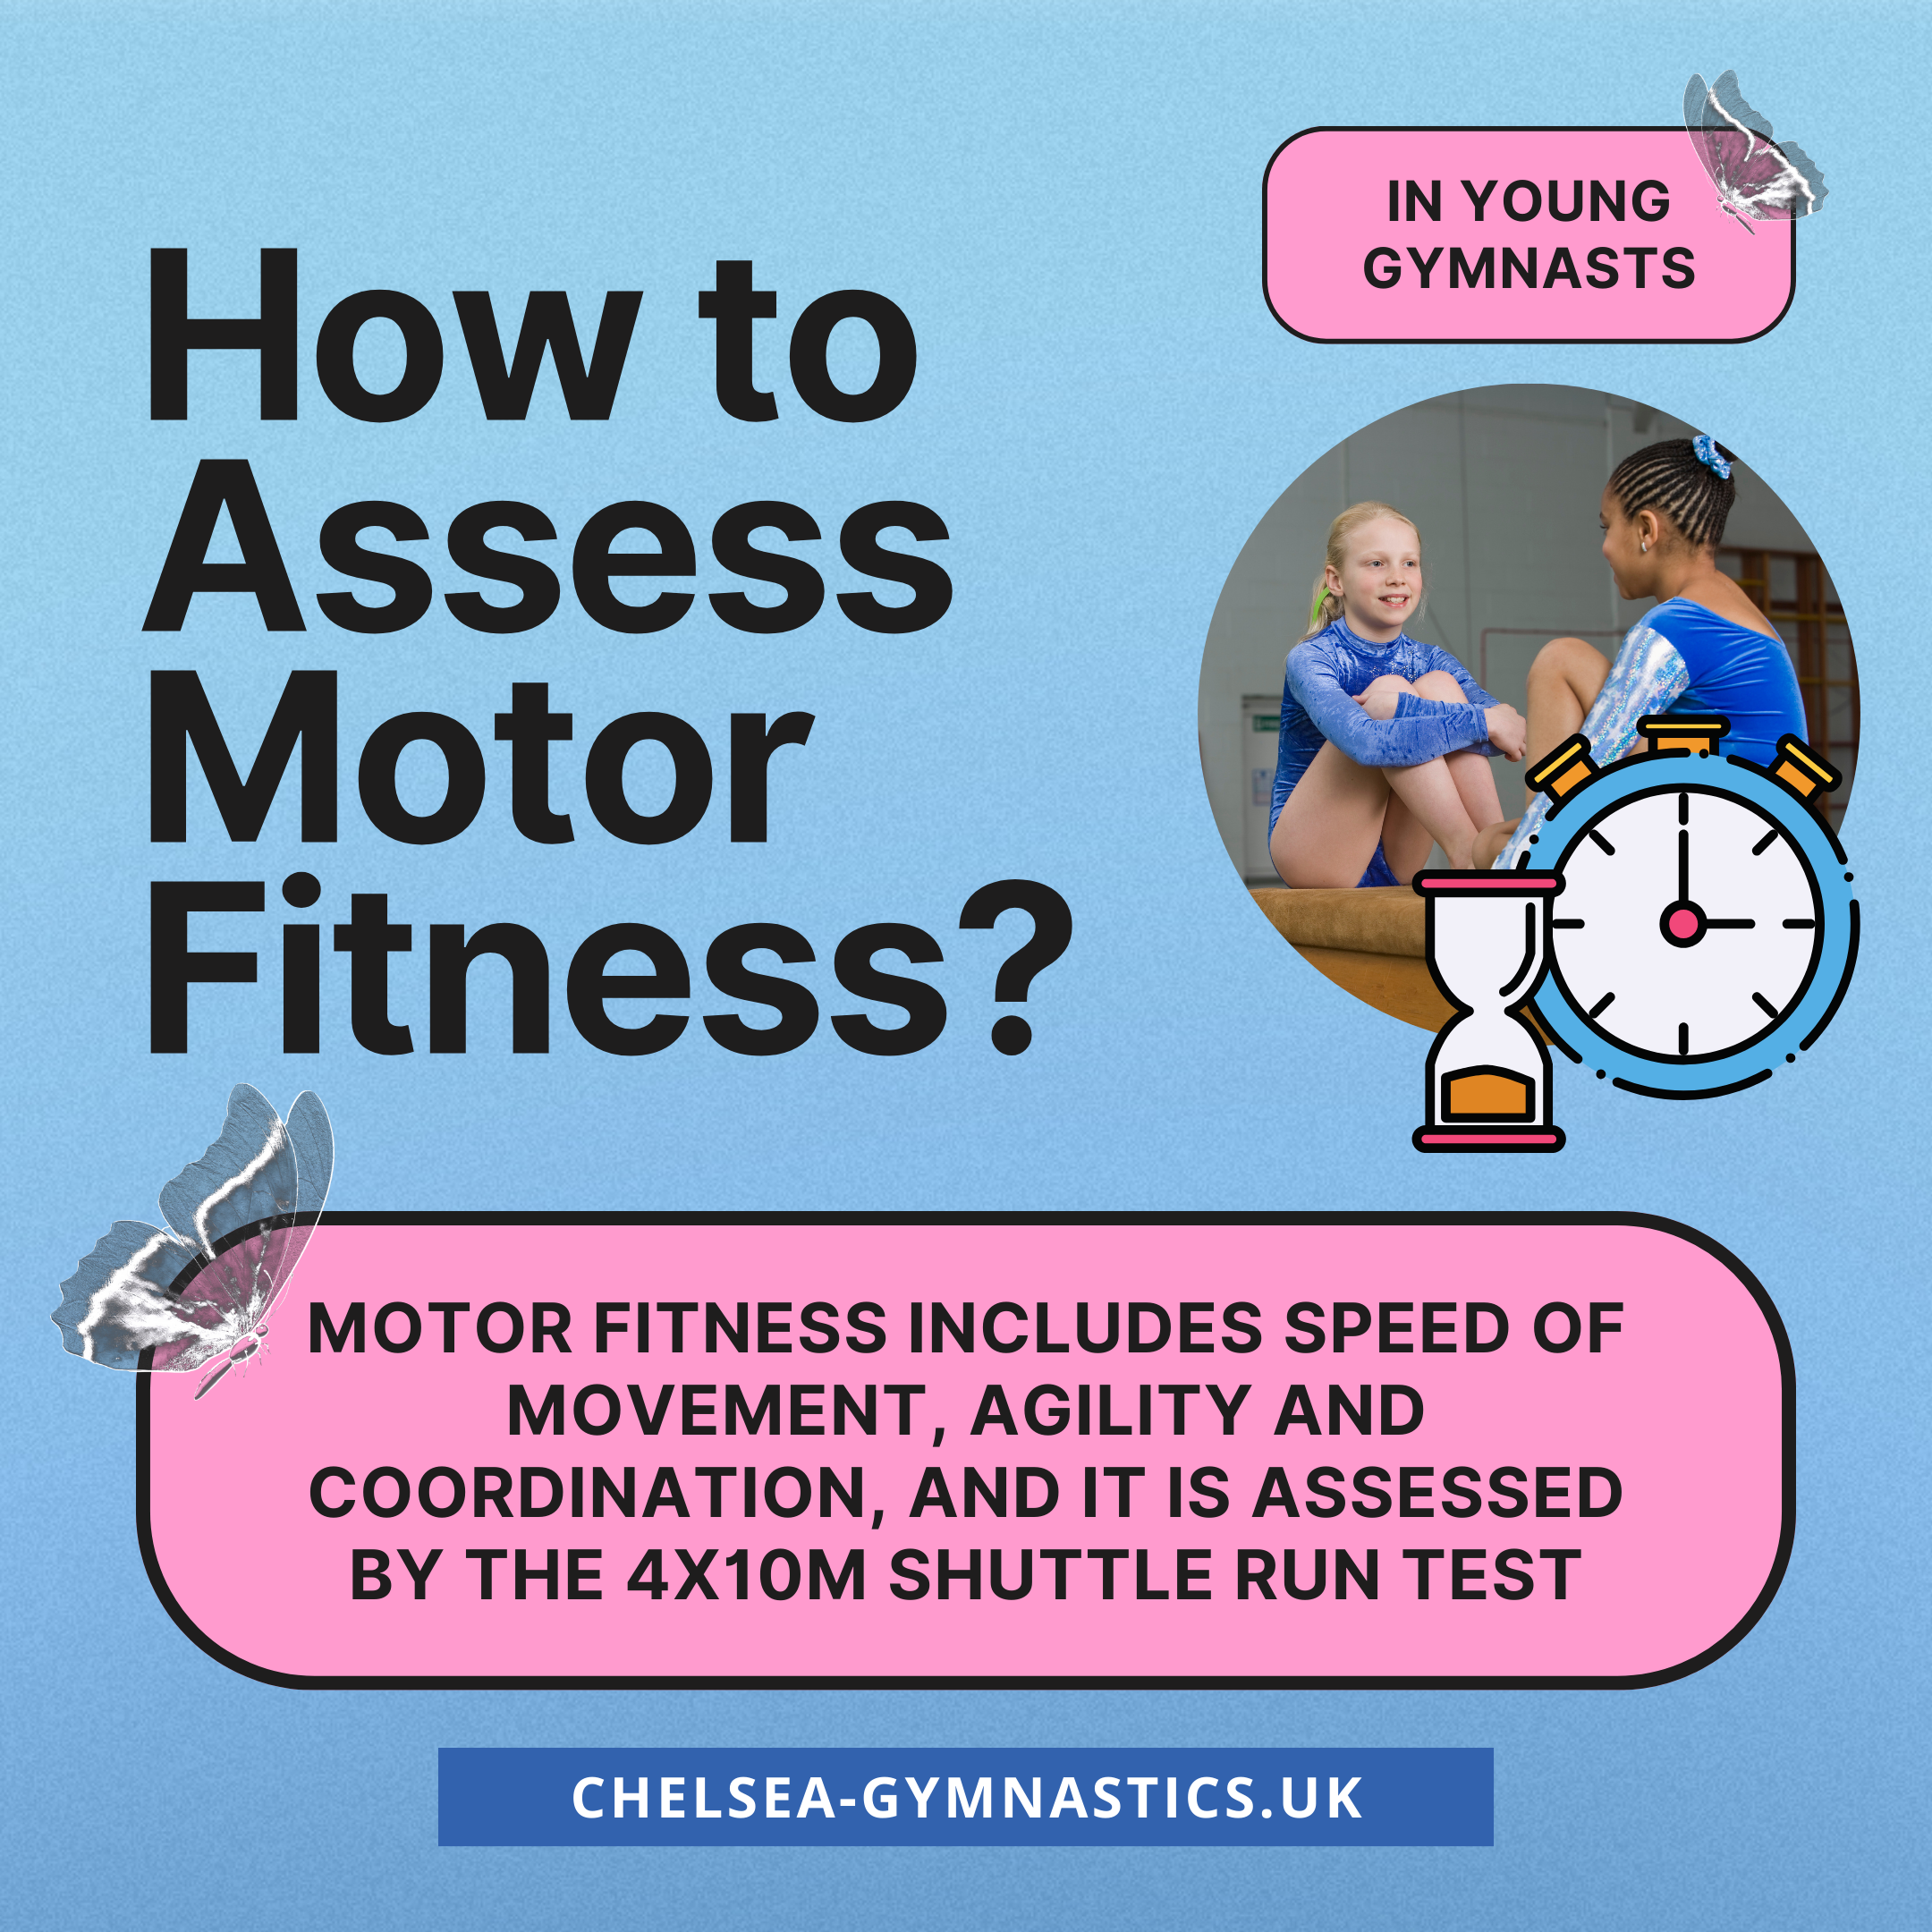 How to assess Motor Fitness in gymnasts?